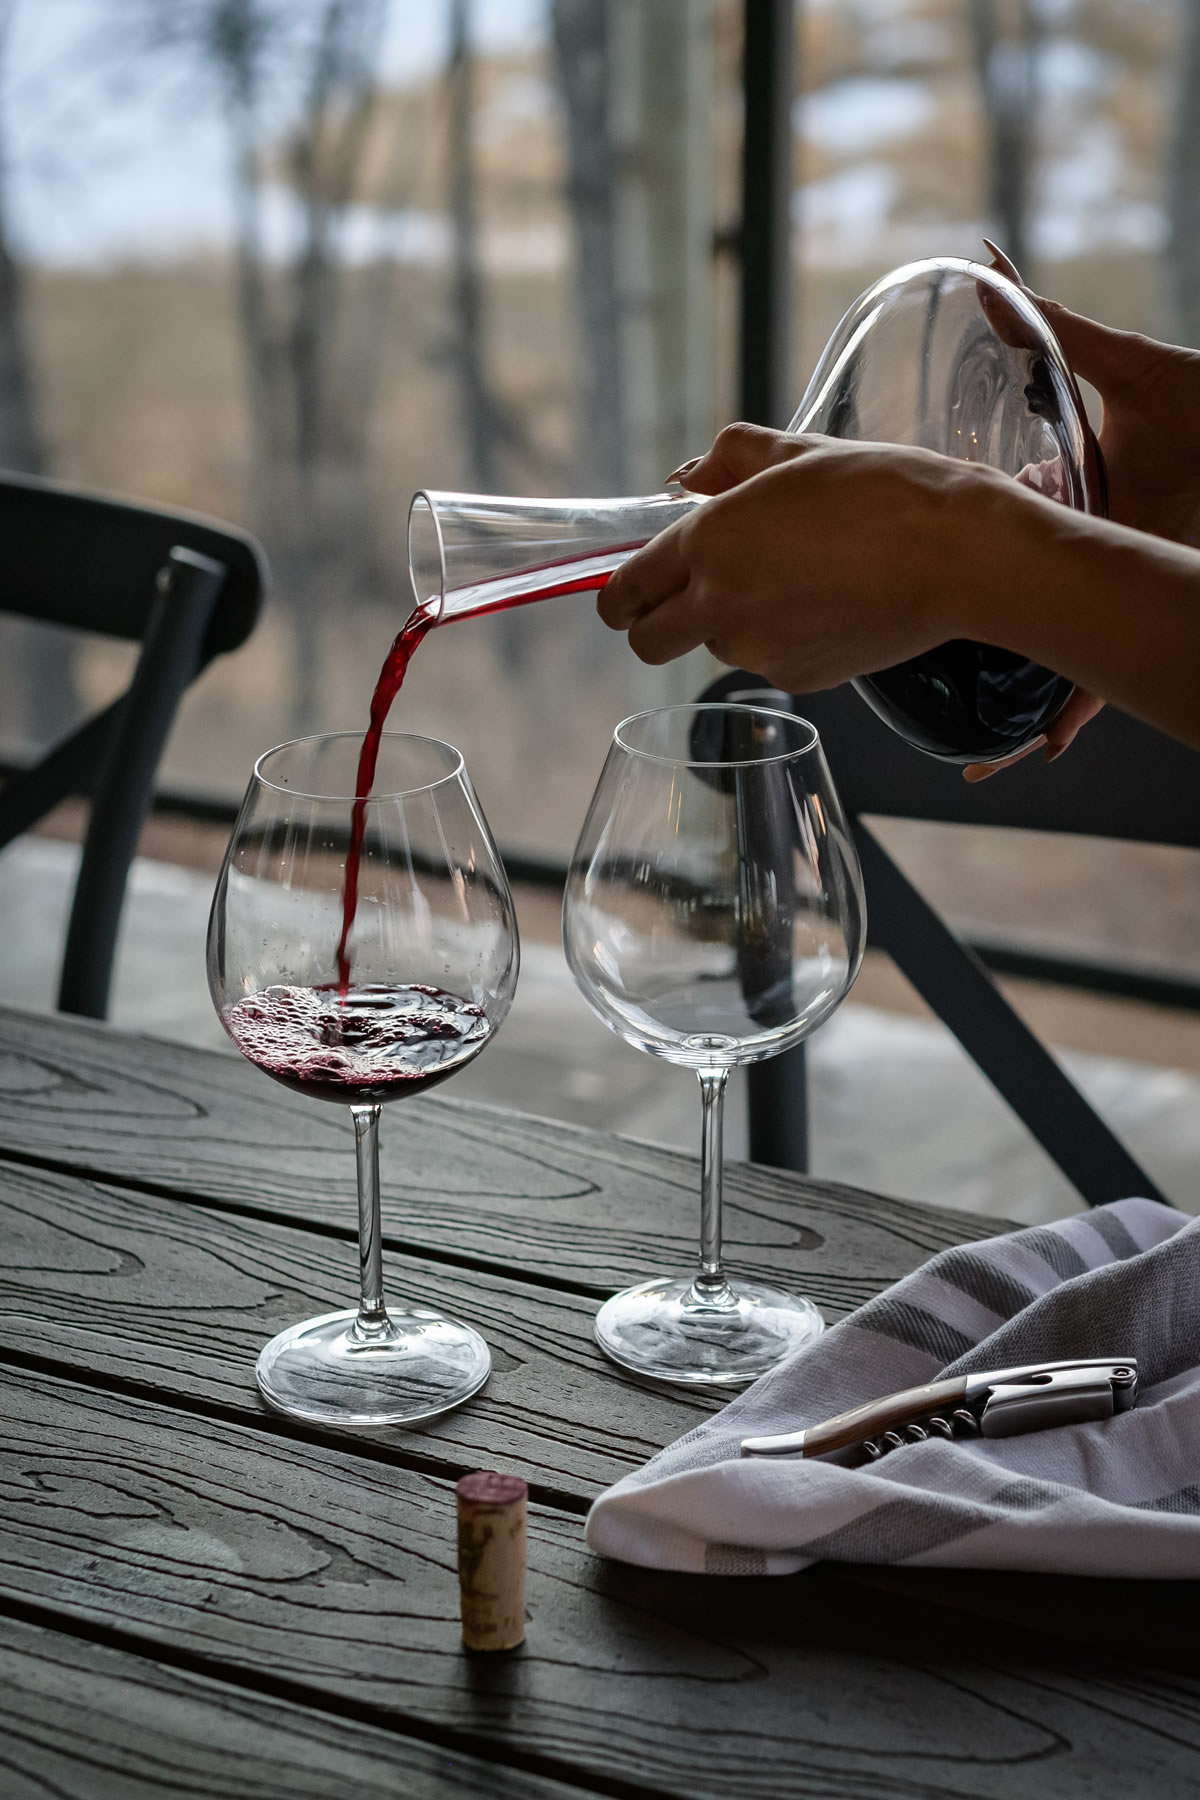 Decanting wine: when, why and how